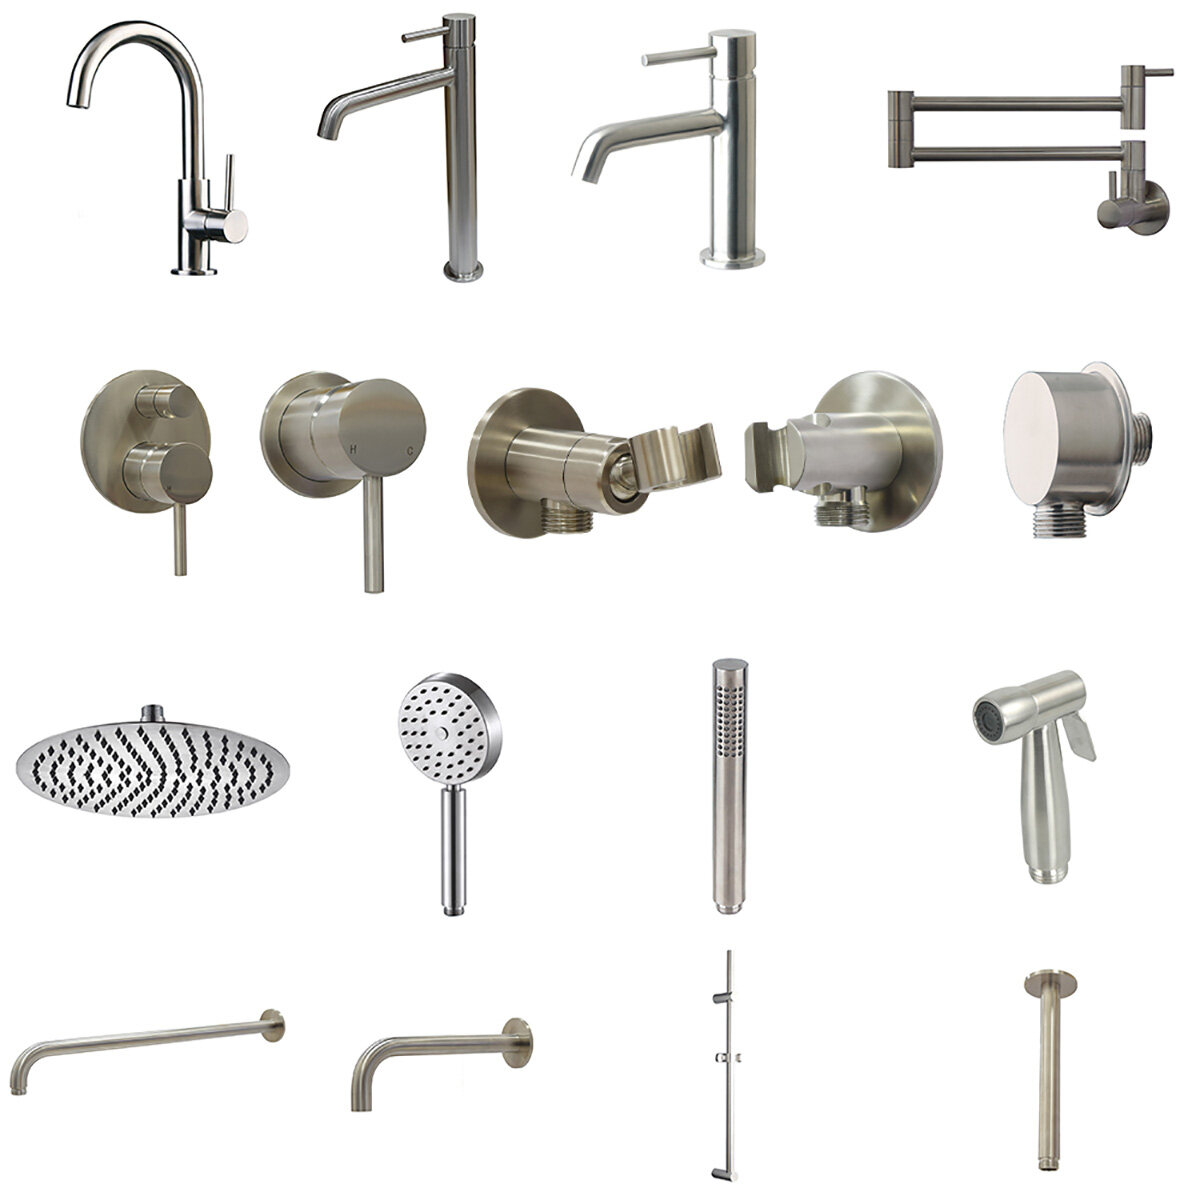 Wall Mounted Stainless Steel Thermostic Shower Mixer